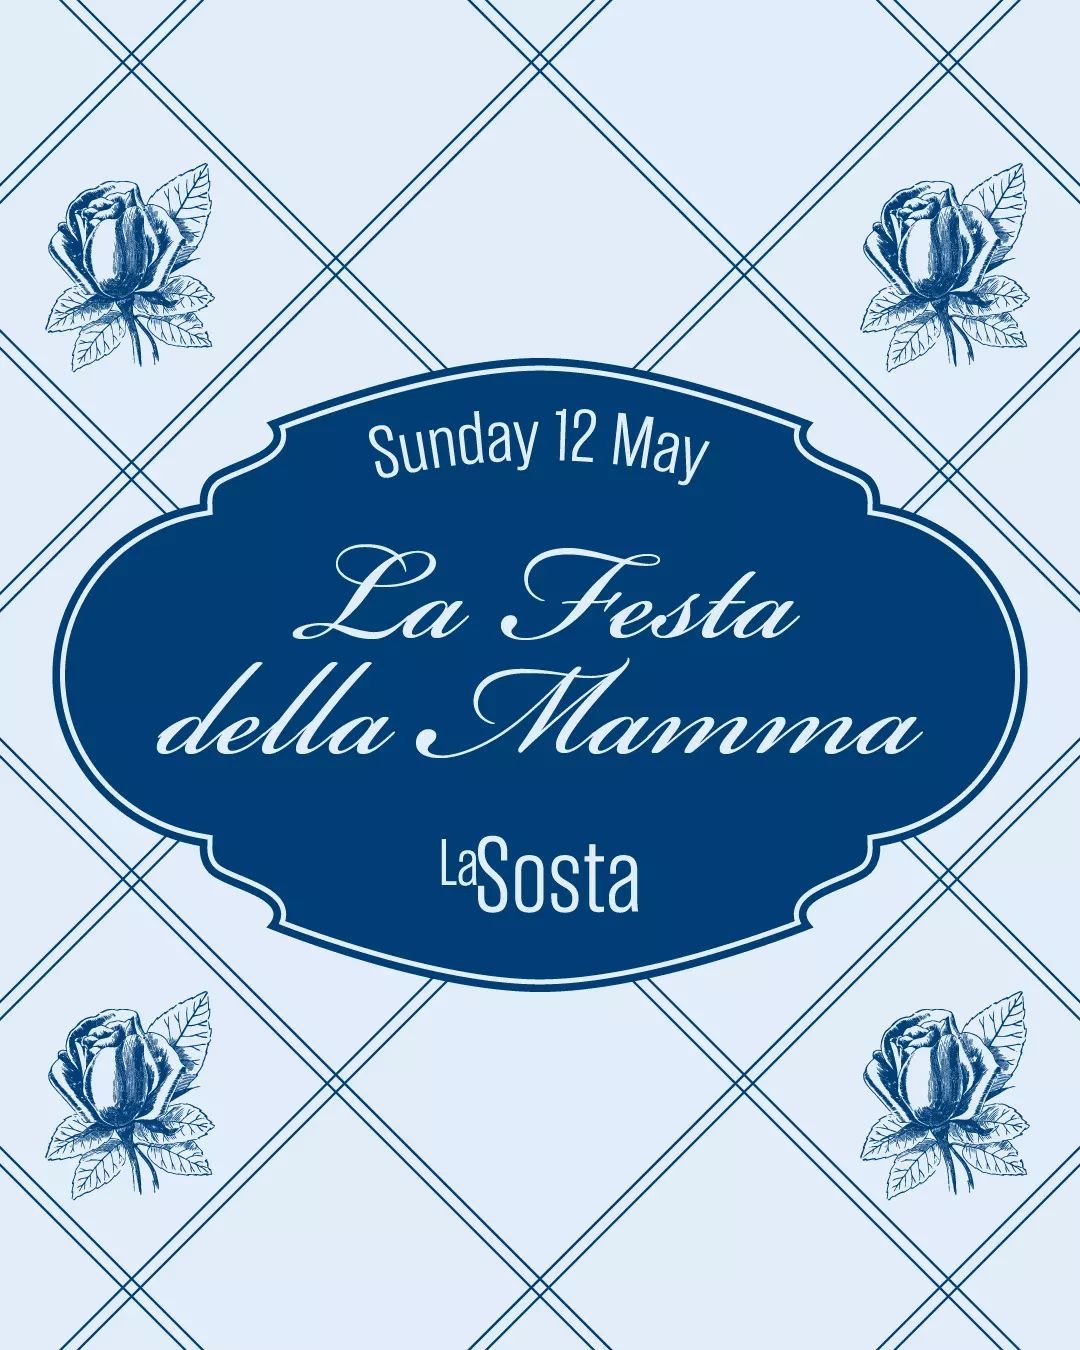 Buona festa della mamma! ❤️ Show your mum amore by treating her to an Italian feast this Mother&rsquo;s Day at La Sosta!

Chef Daniele&rsquo;s new &agrave; la carte menu is on offer and mum will enjoy a complimentary glass of Prosecco. No set menus, 